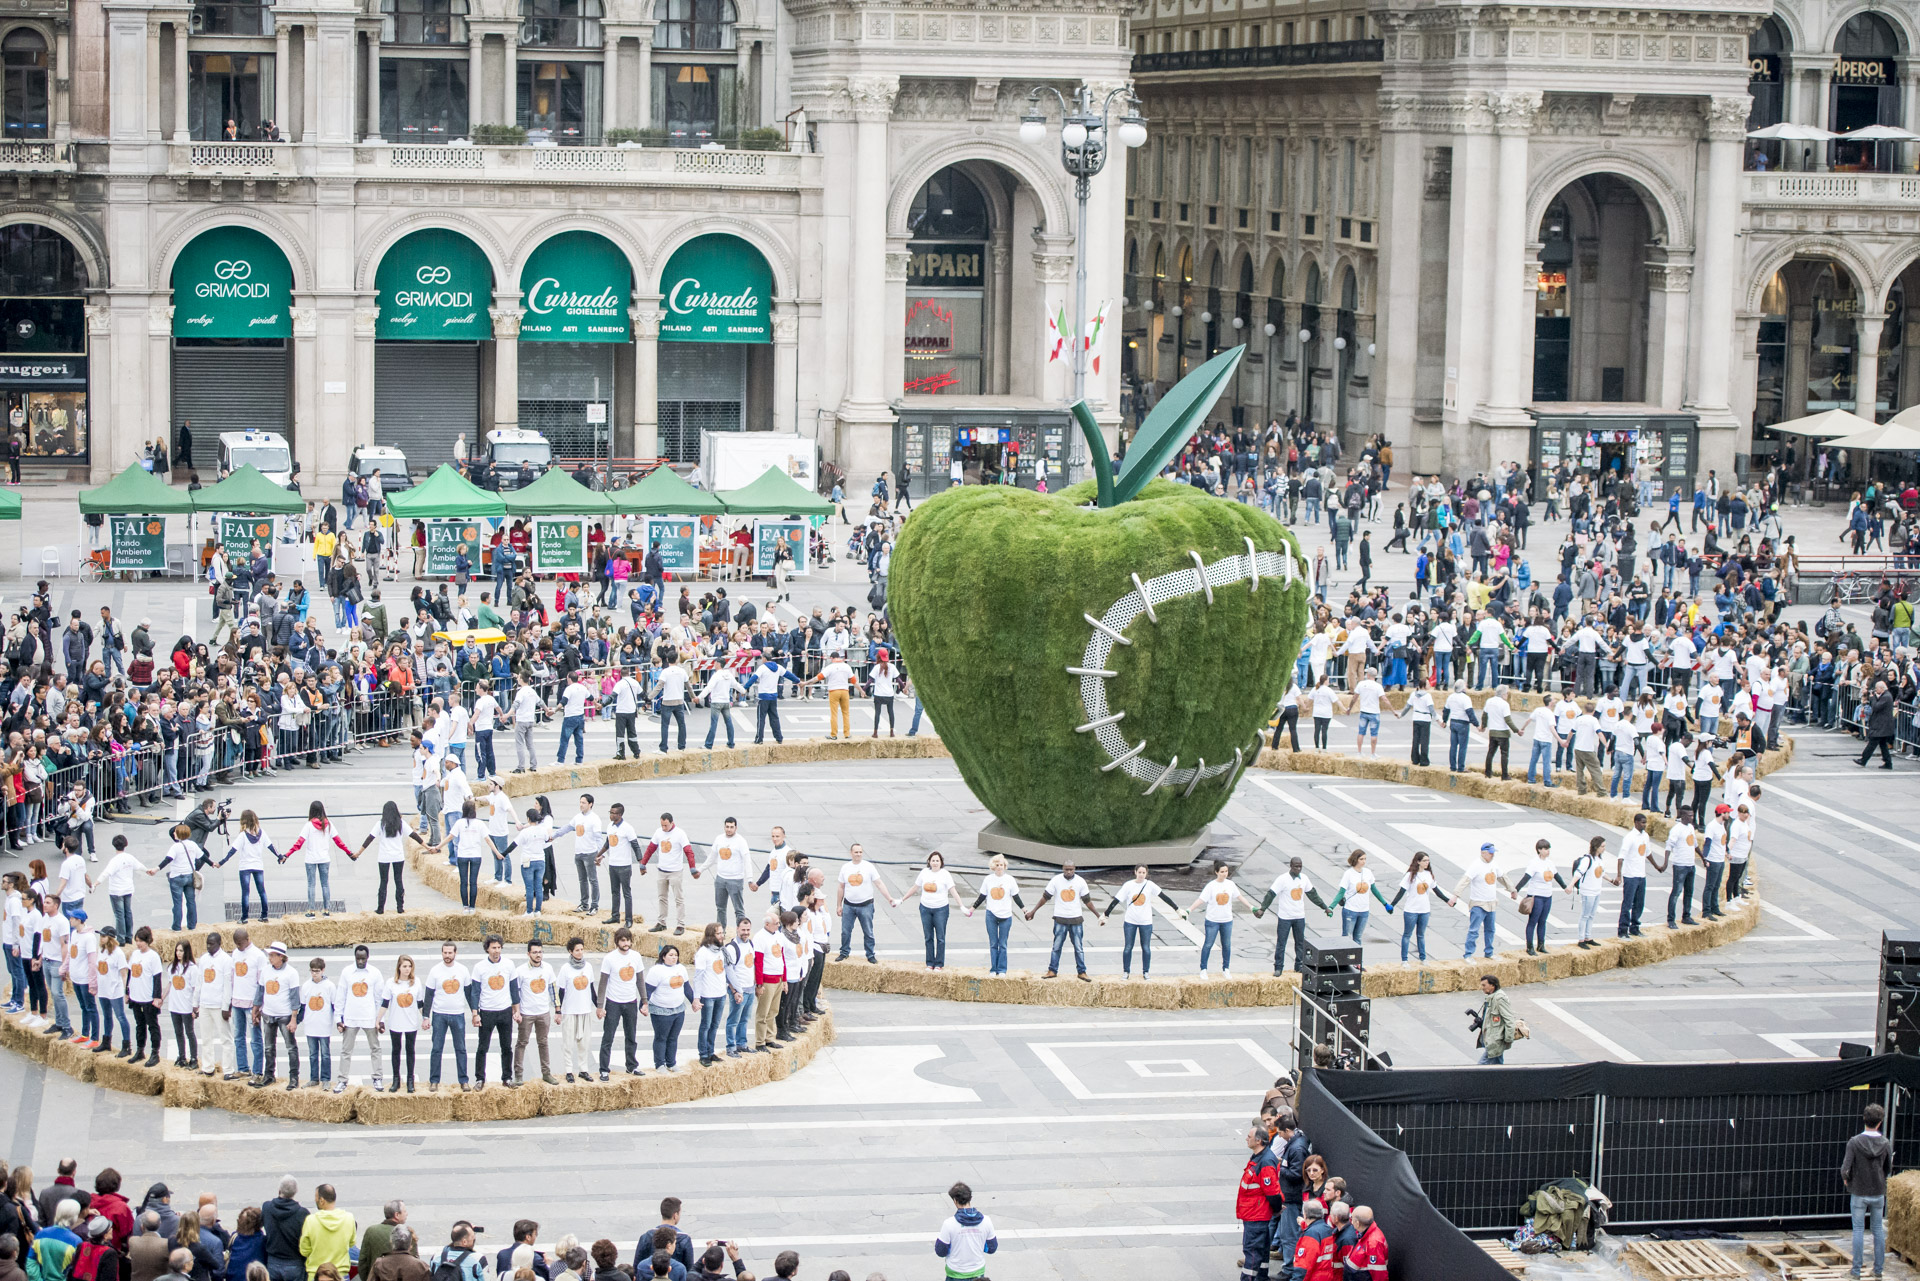 Photo of people standing holding hands forming three circles, Michelangelo Pistoletto Third Paradise symbol, large sculpture of a mended bitten green apple in center, Piazza del Duomo, Milan